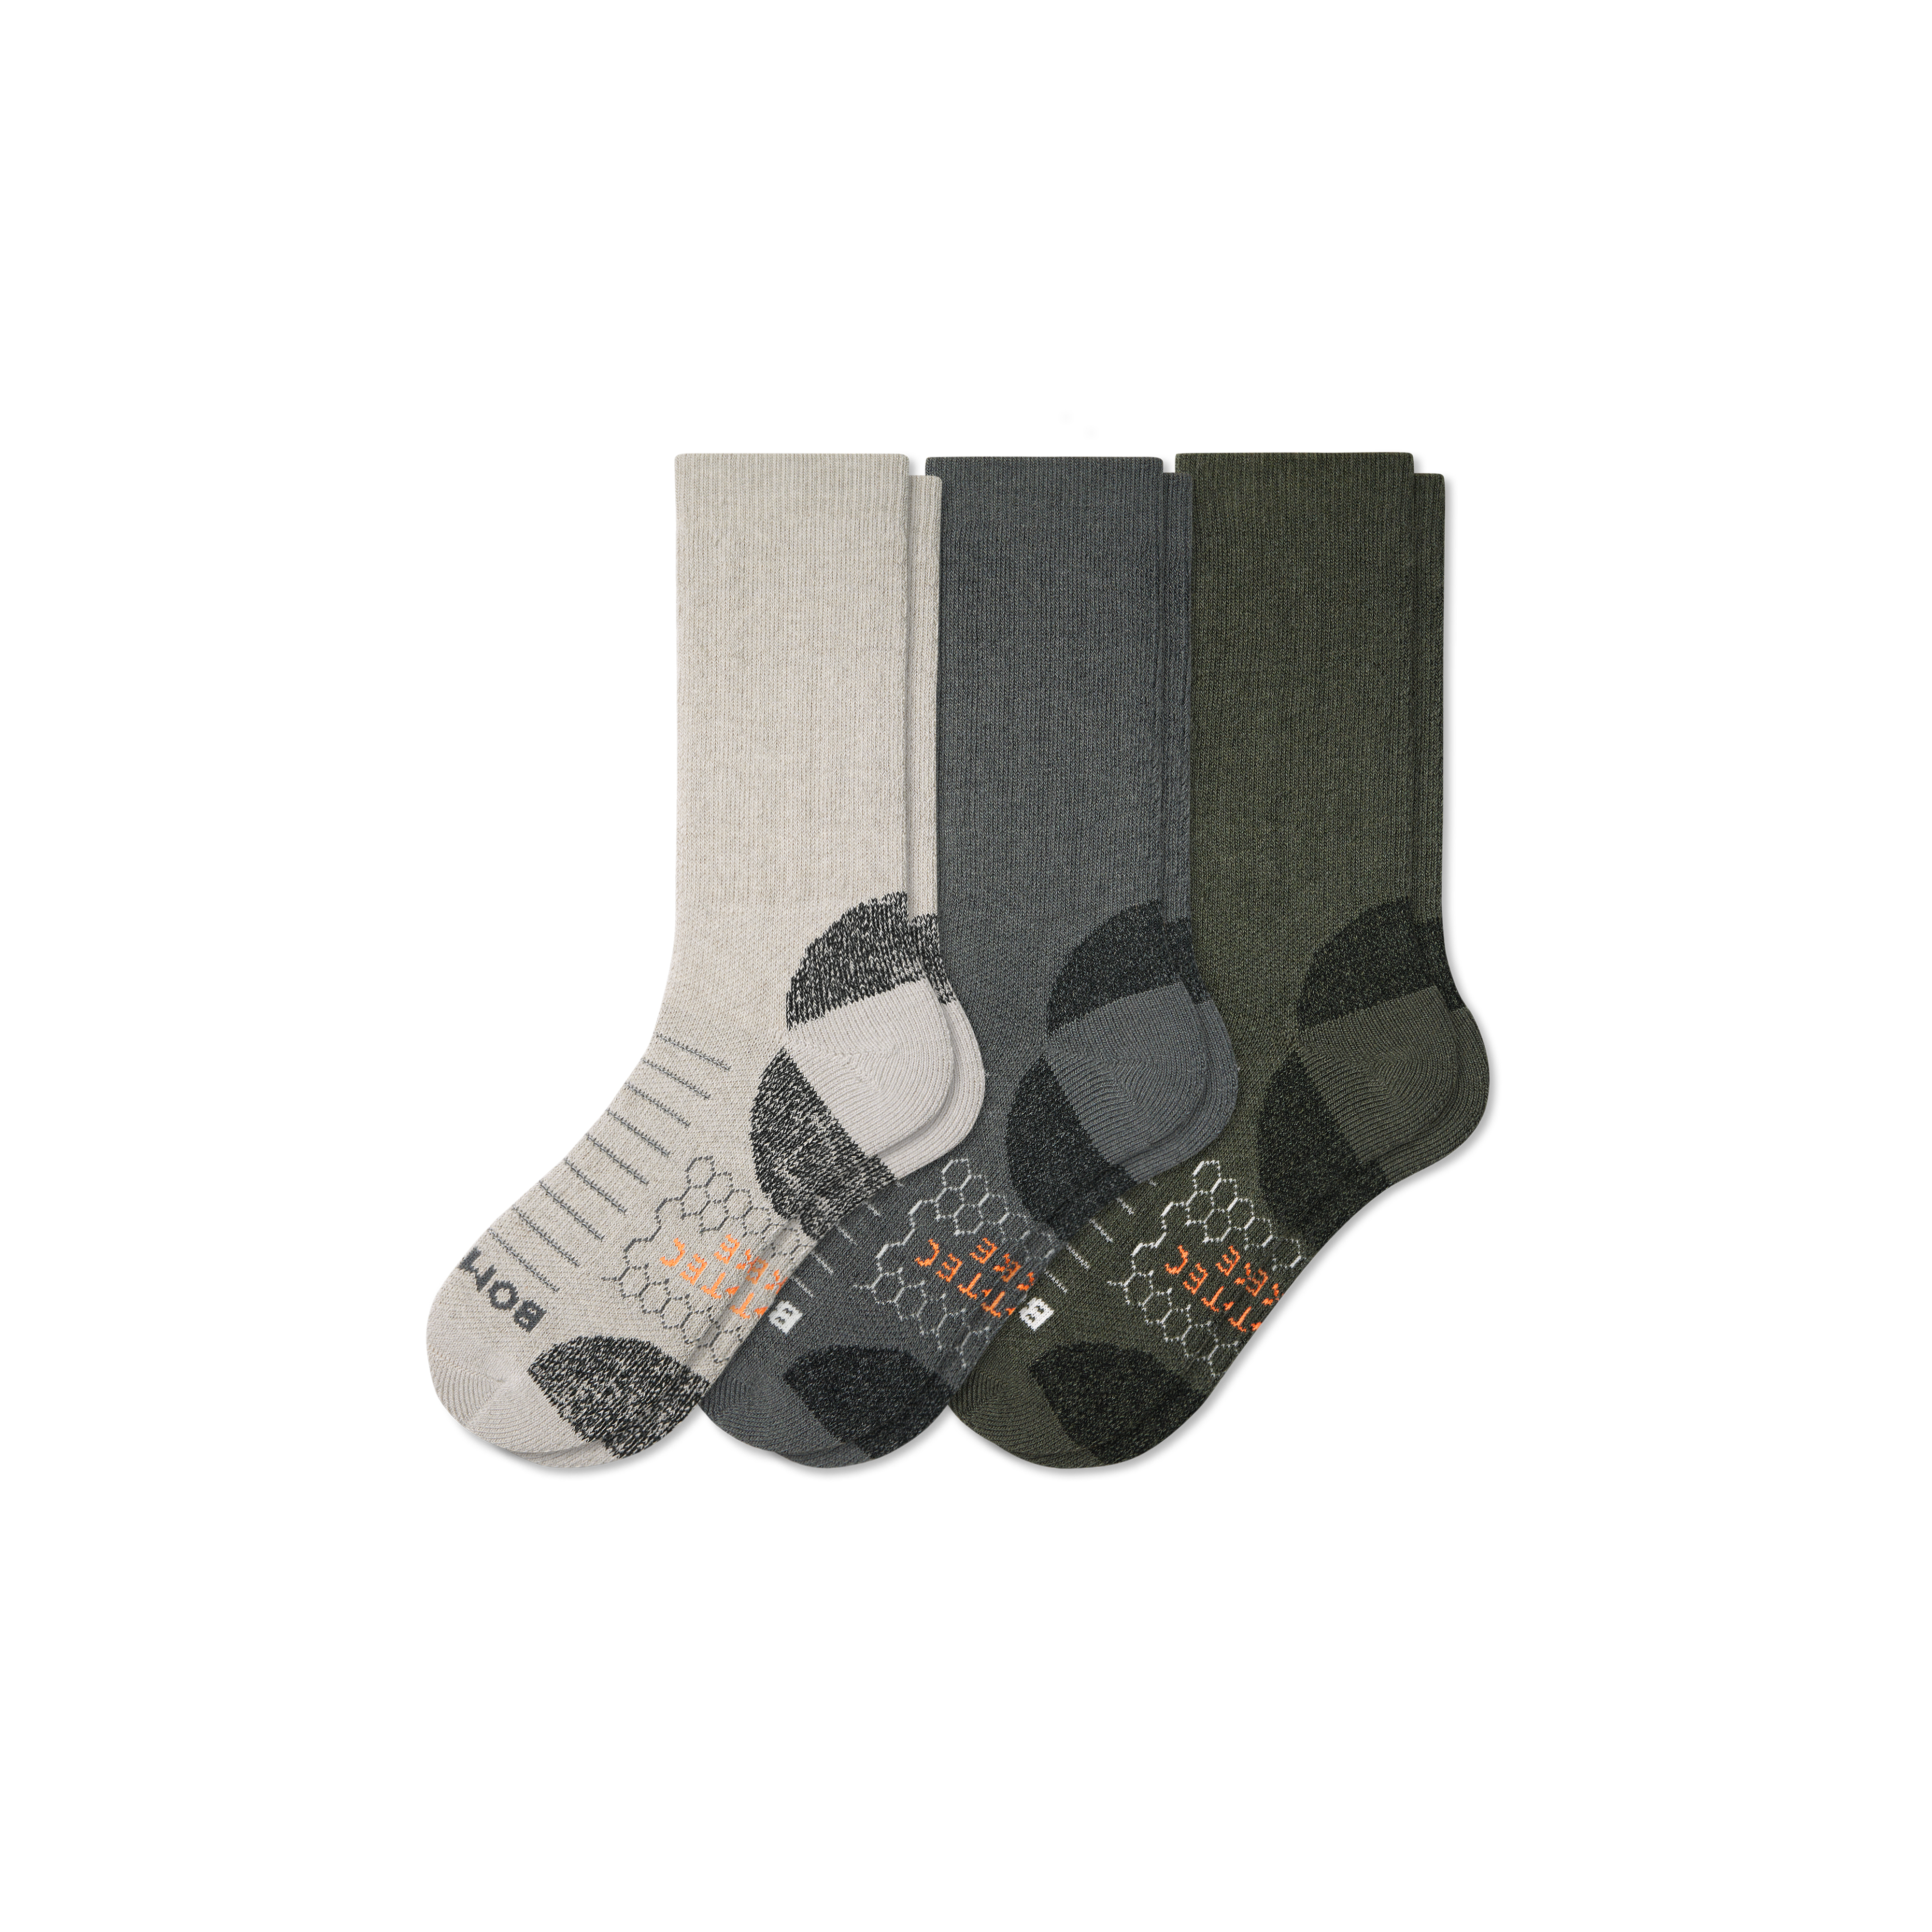 Bombas Hiking Performance Calf Sock 3-pack In Olive Shade Mix